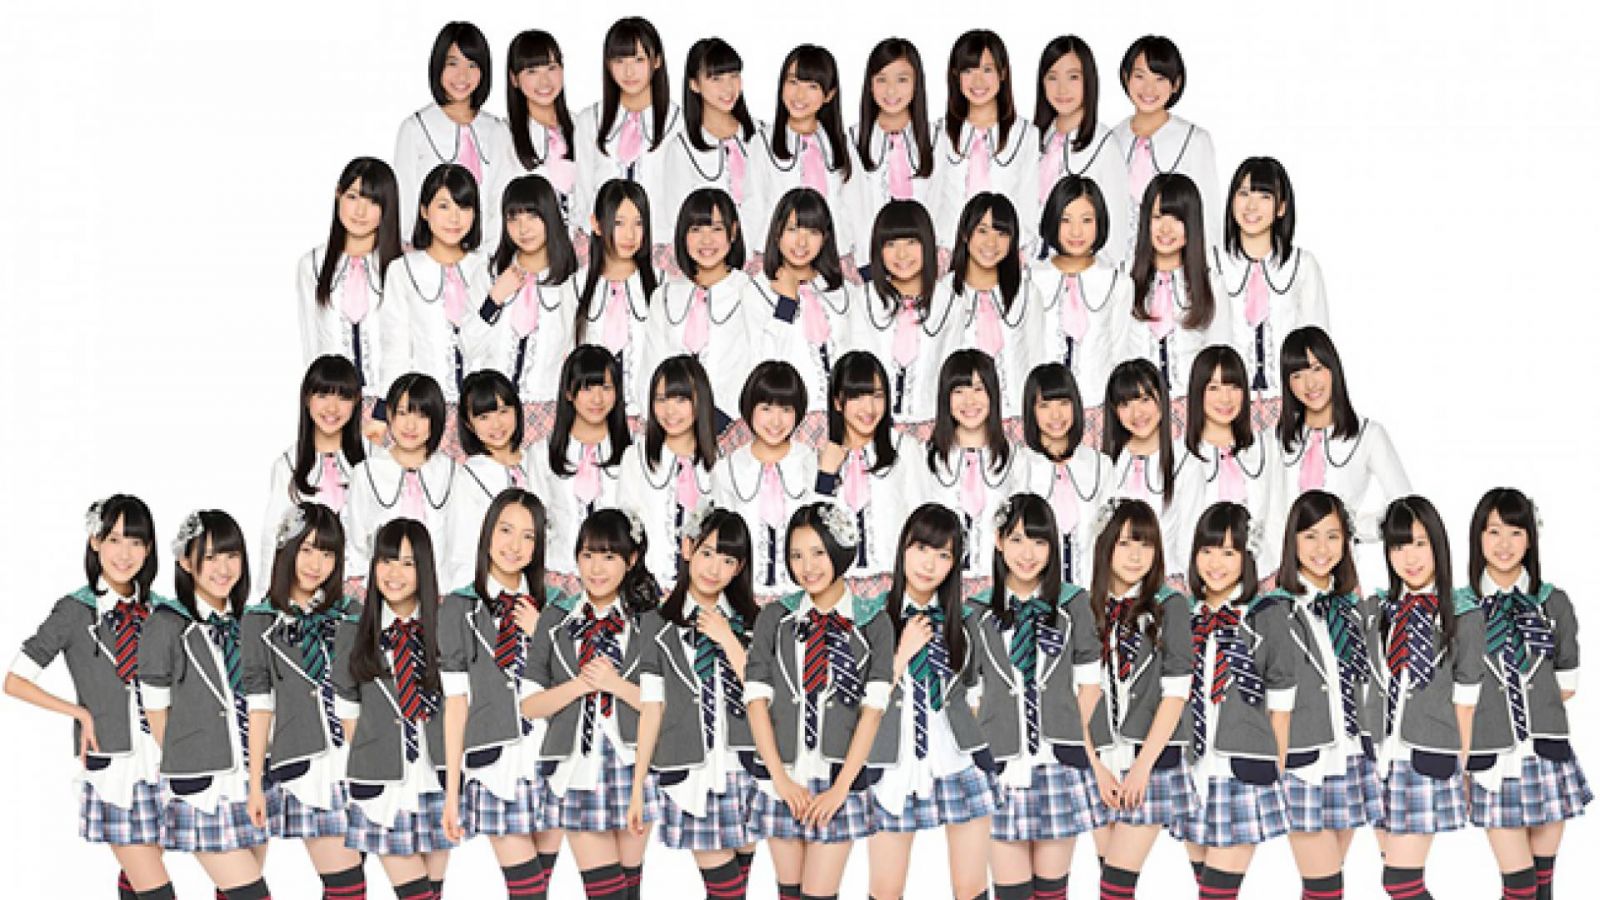 HKT48 © Universal Music Japan, all rights reserved